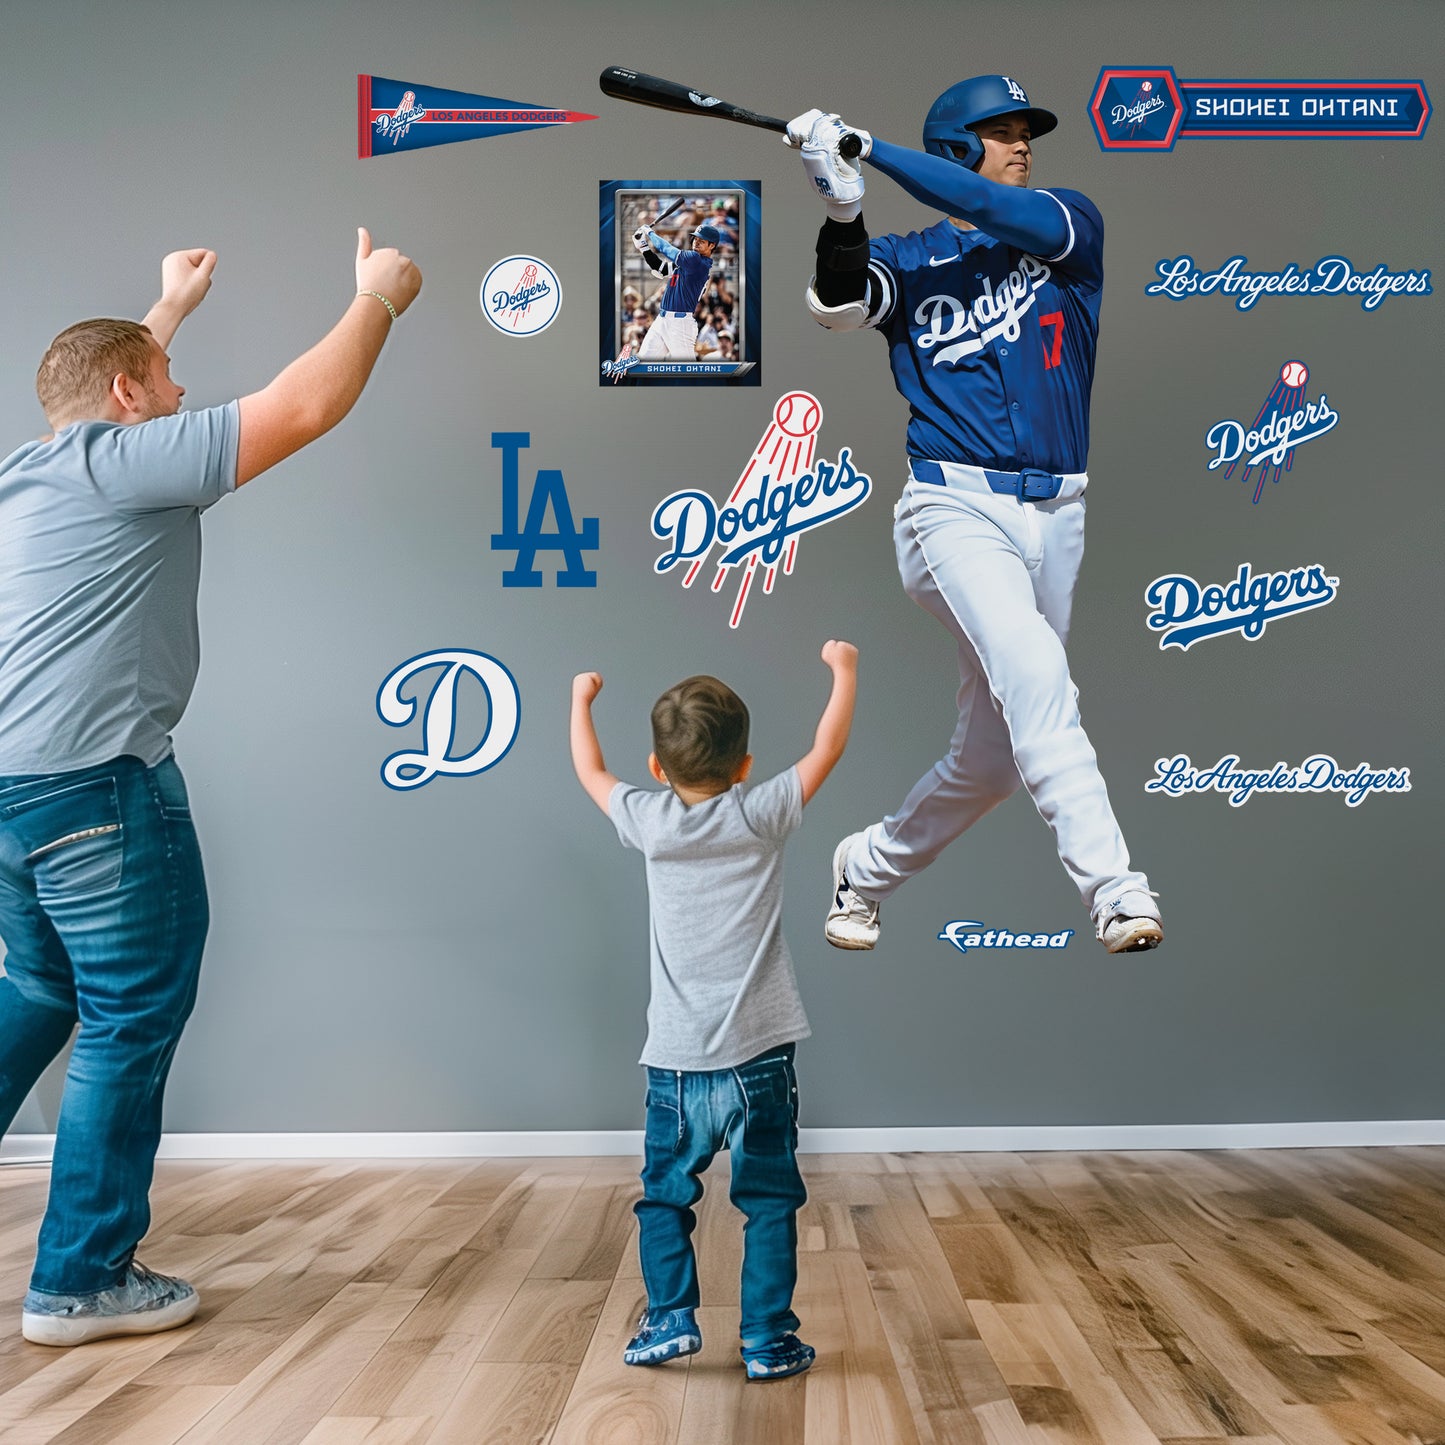 Los Angeles Dodgers: Shohei Ohtani         - Officially Licensed MLB Removable     Adhesive Decal